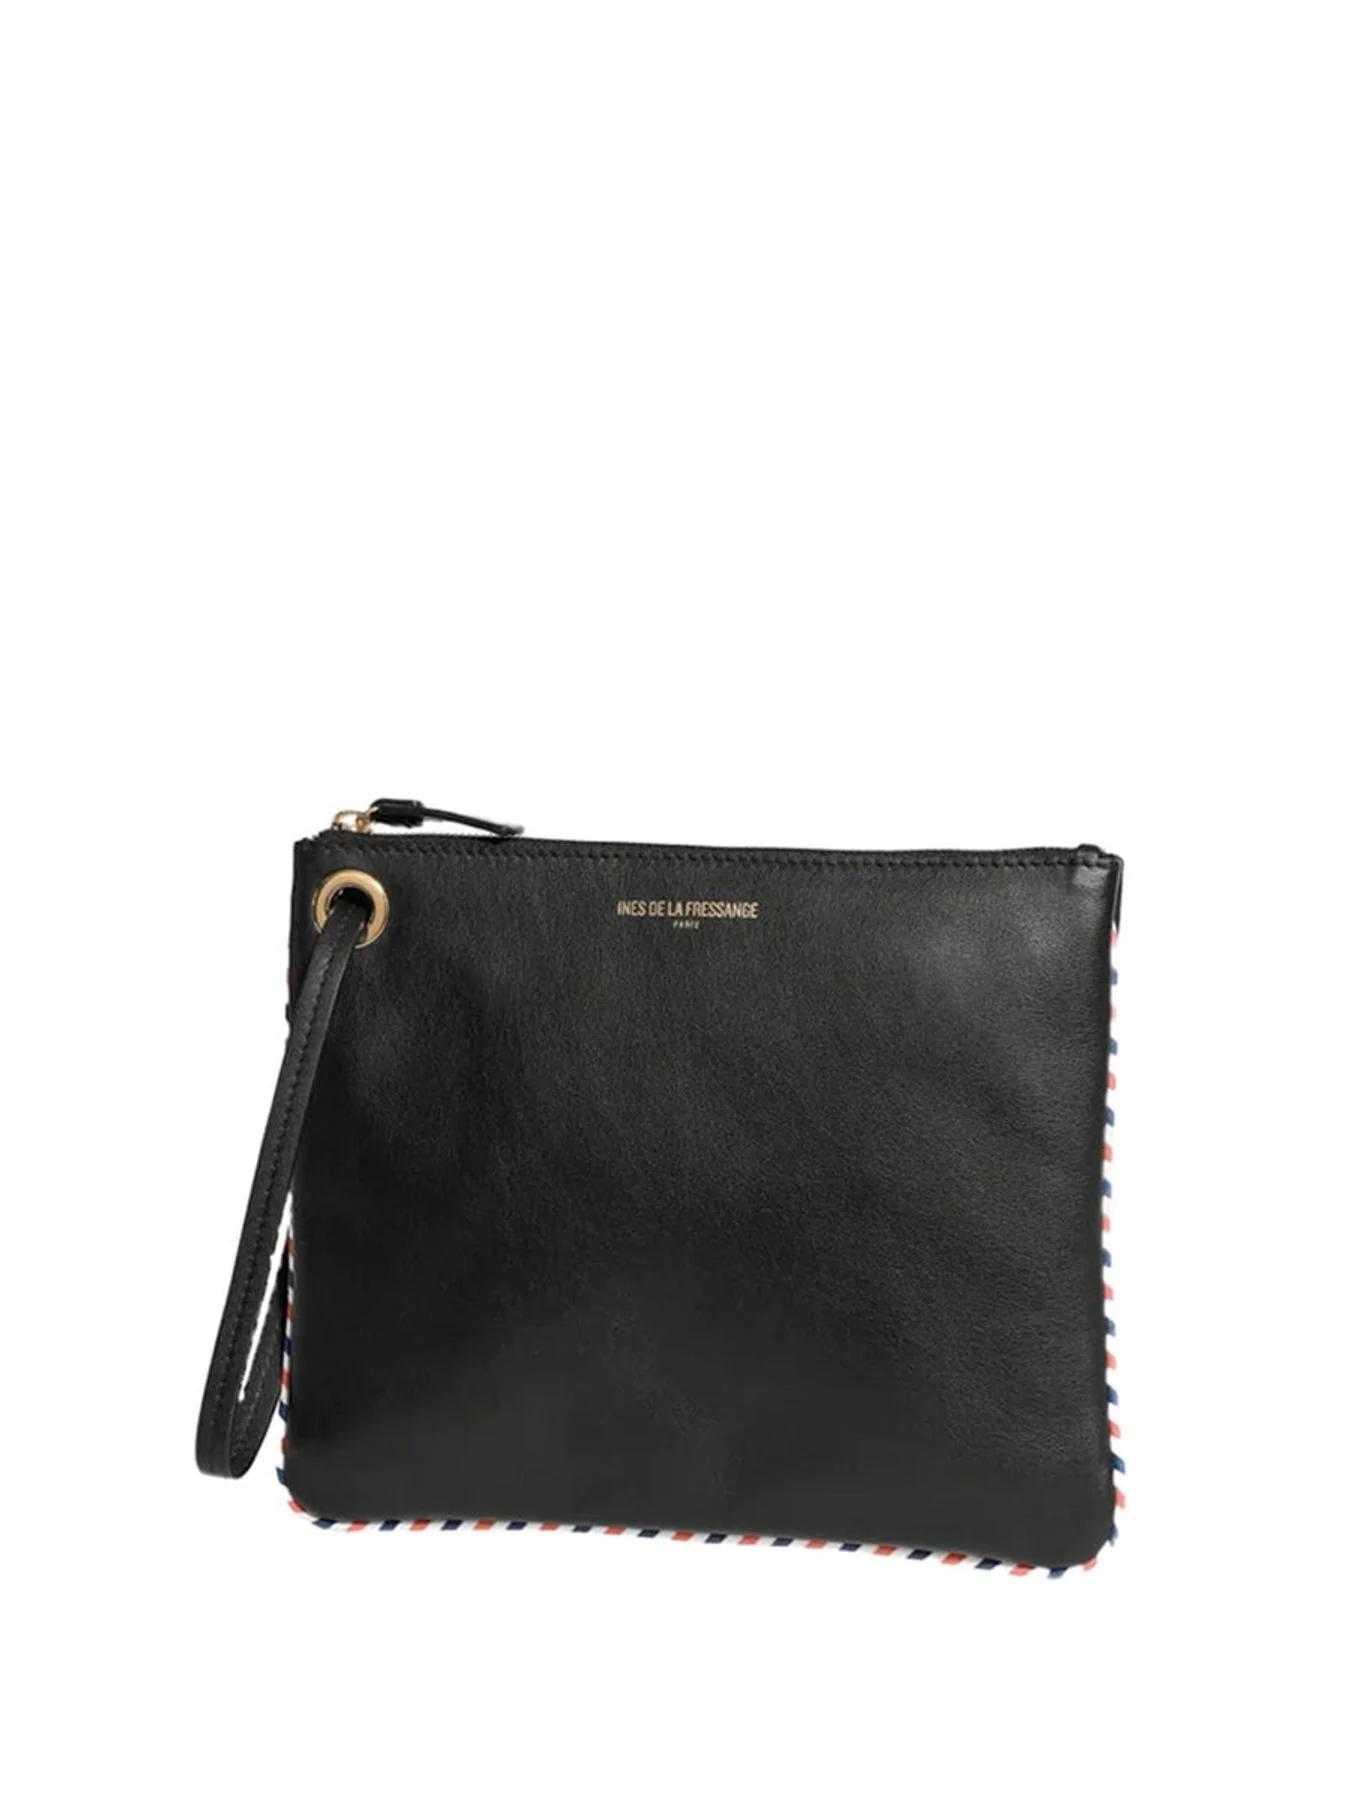 marcia-l-leather-black pouch